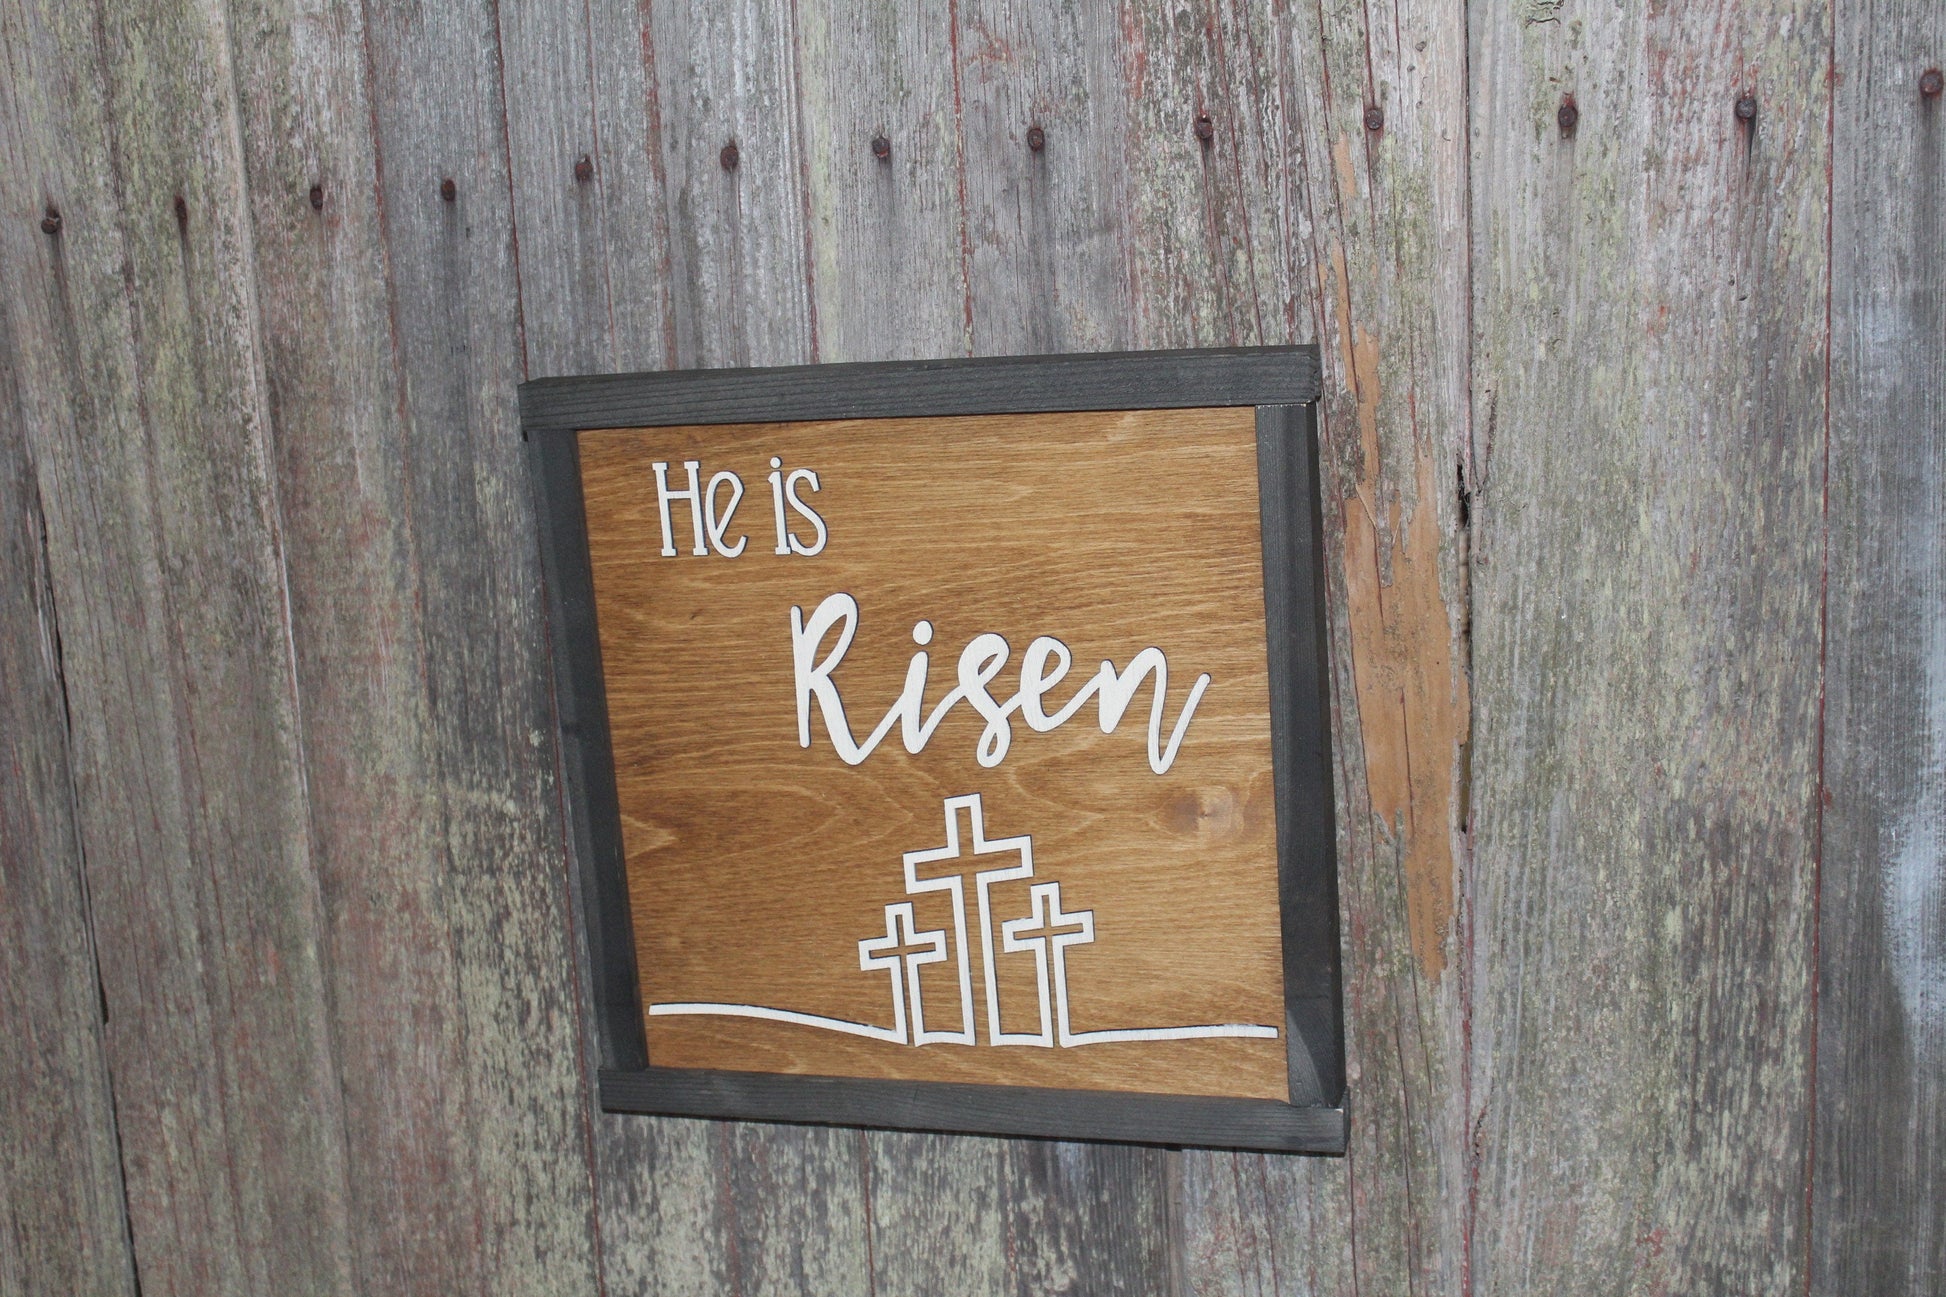 He Is Risen Easter Celebration Wood Sign 3D Raised Text 3 Crosses Rustic Jesus Lives Primitive Decor Wall Hanging Spring Resurrection Day